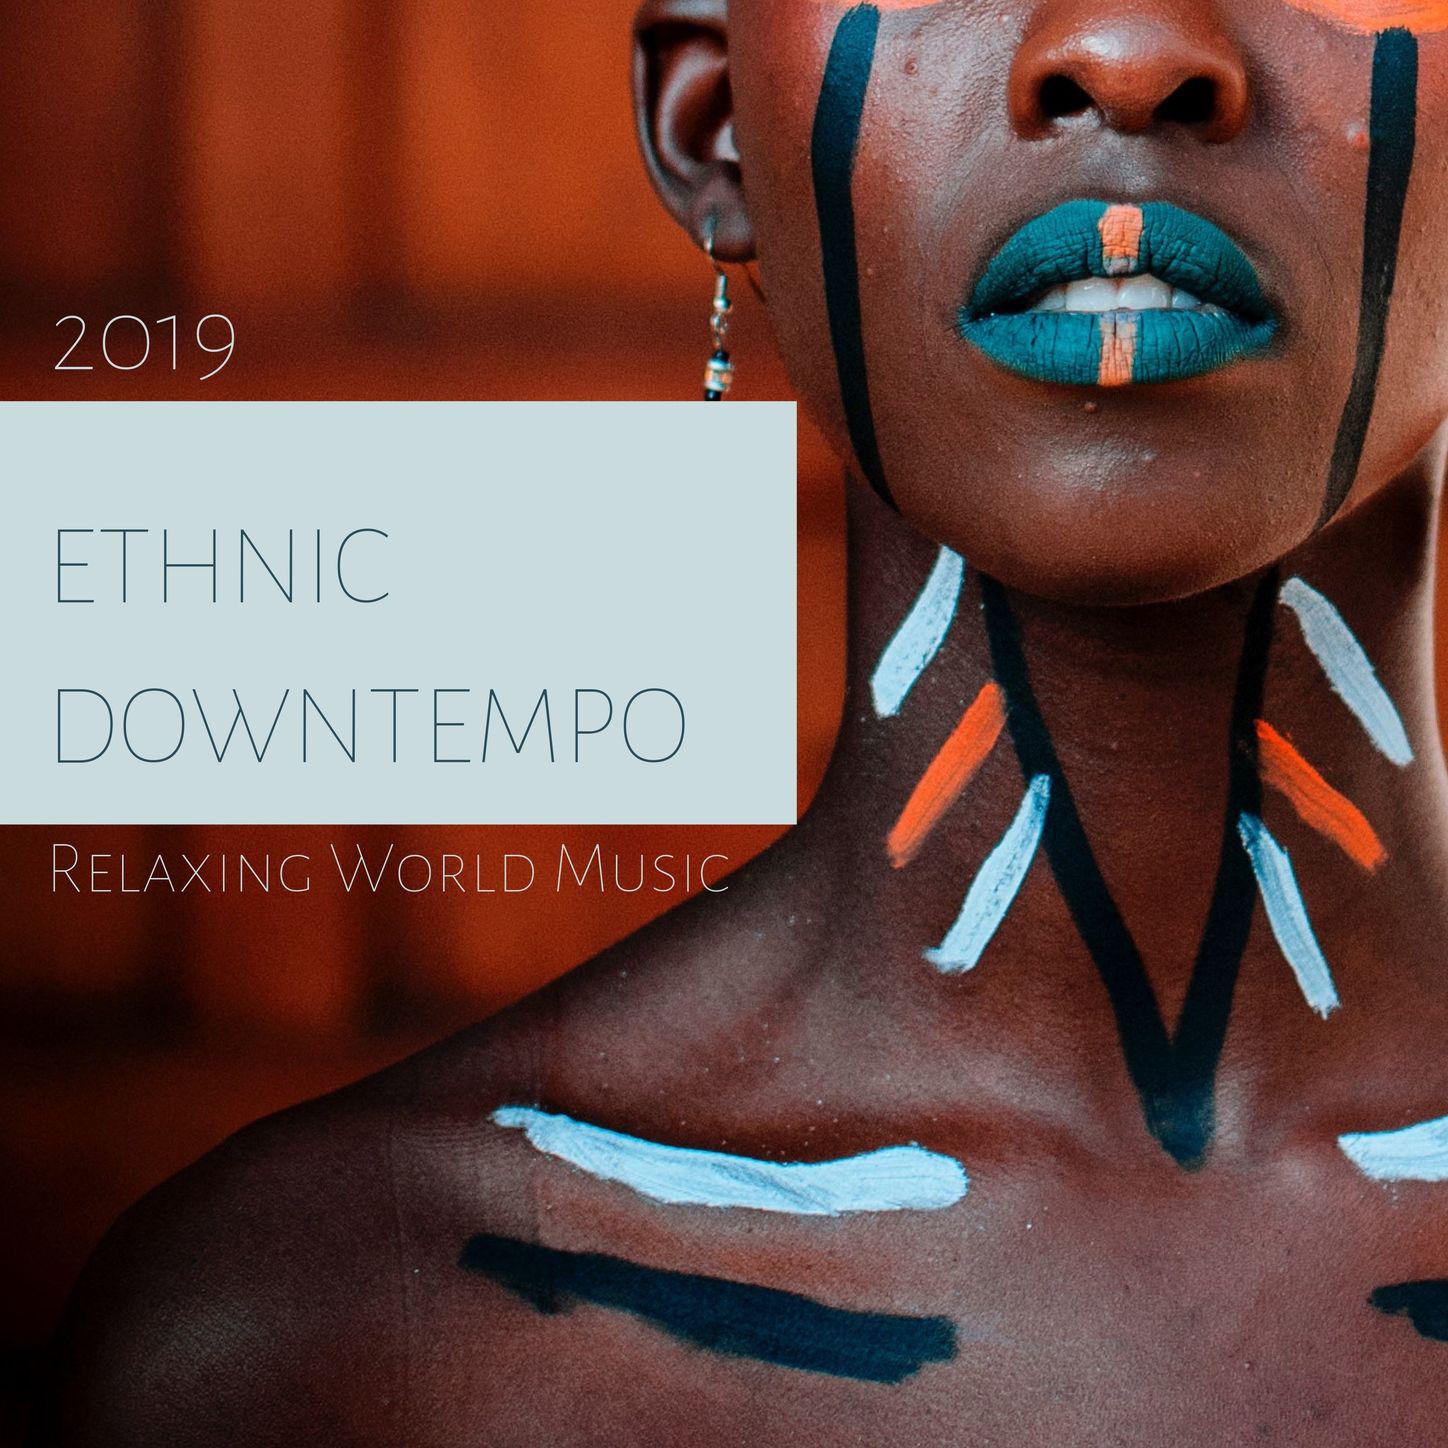 Ethnic Downtempo 2019: Relaxing World Music